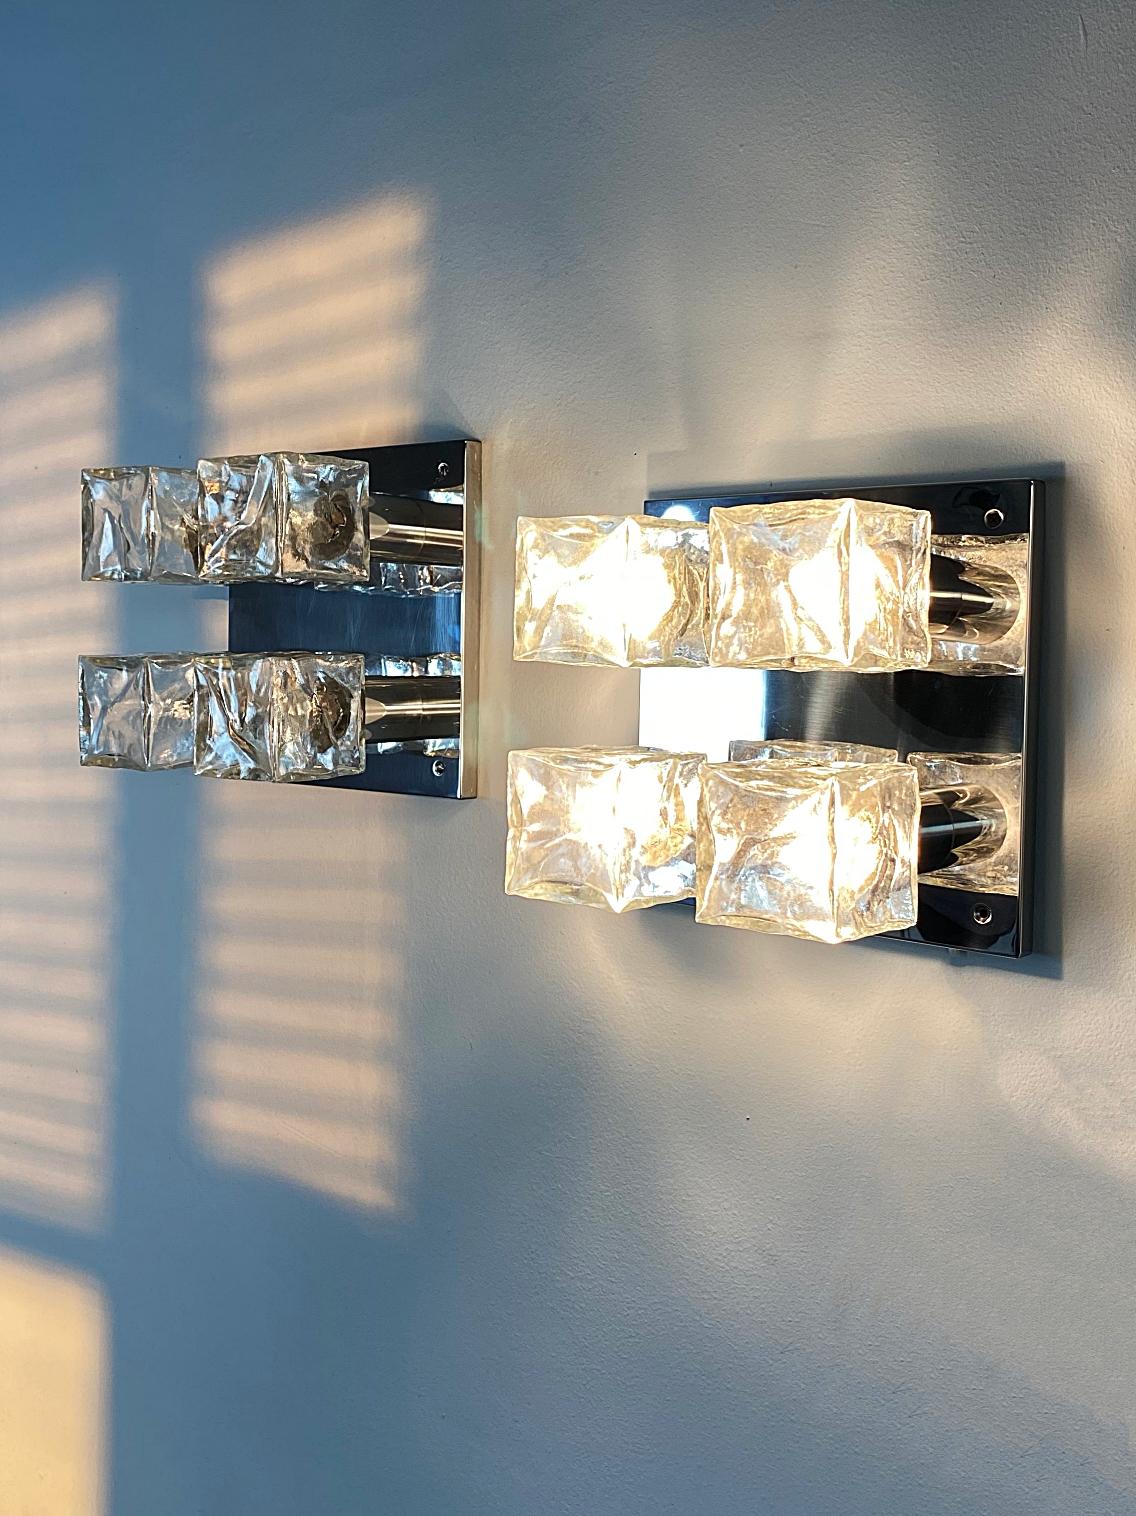 Pair of beautiful modernist fixture lights manufactured by J.T. Kalmar in 1960s, Vienna. The lights can be used as wall or ceiling lamps. They are featuring a polished stainless steel body with ice glass cubes.
Fully working and tested condition.